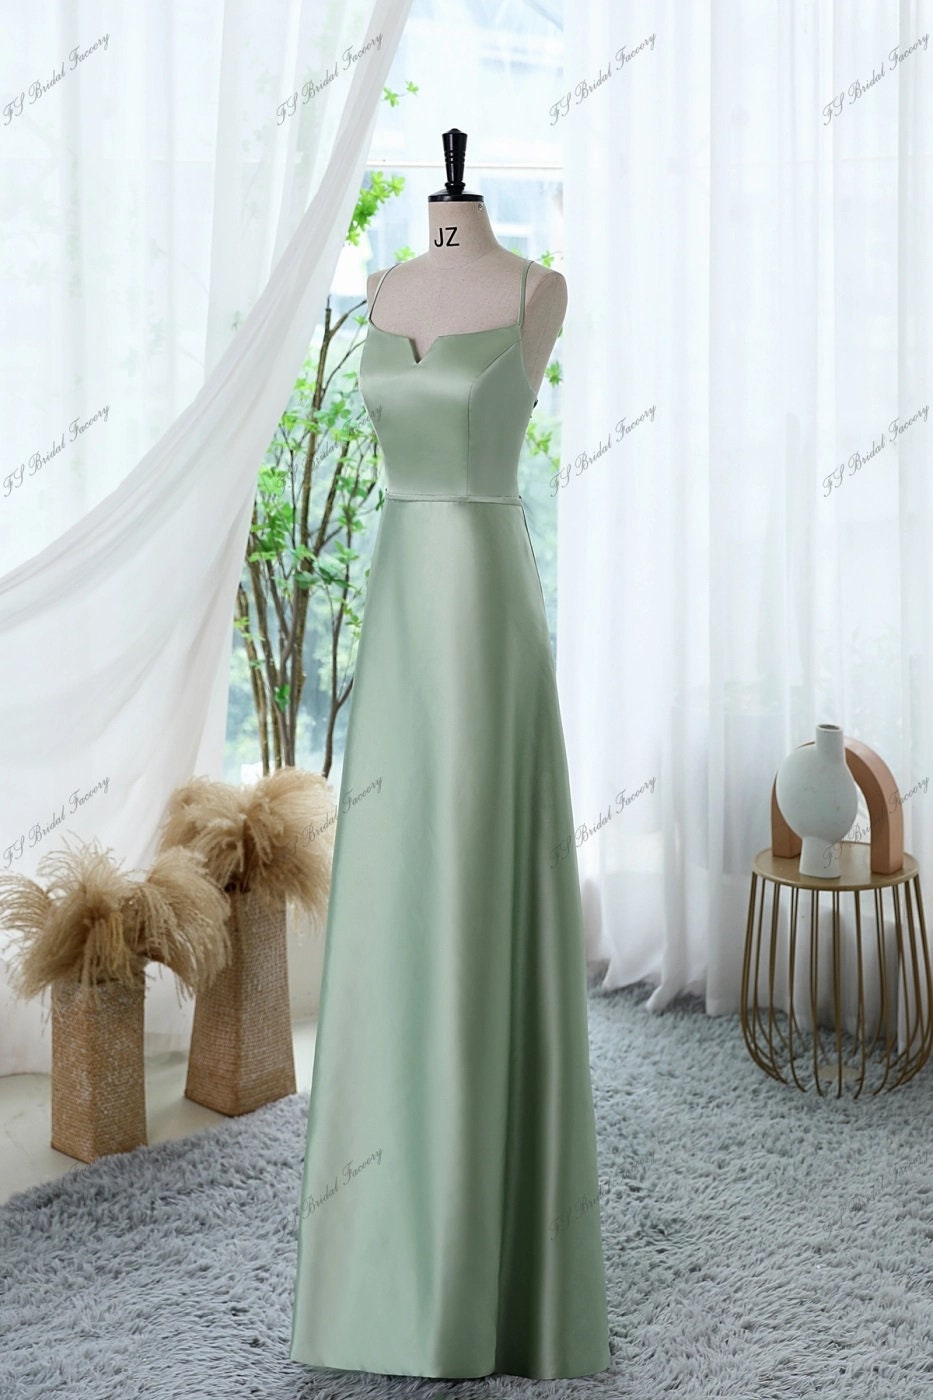 Soft Satin Bridesmaid Dress with Lace 3-D Leaves Illusion Back Slight V Front Sleeveless with Straps Floor Length Formal Dress Gala